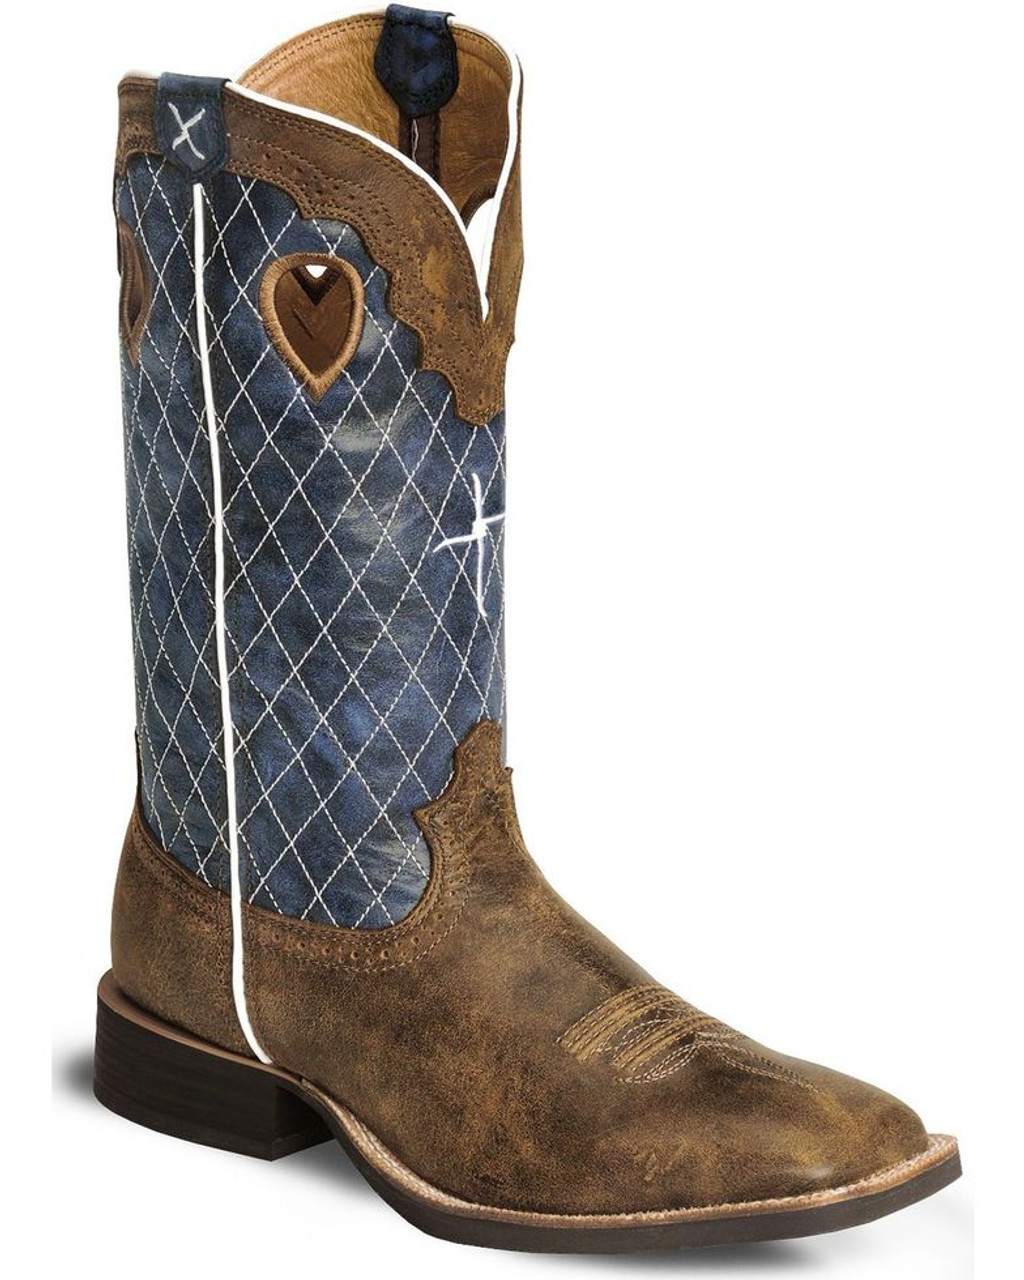 MRS0027 Twisted X Distressed Ruff Stock Cowboy Boots - Wide Square Toe